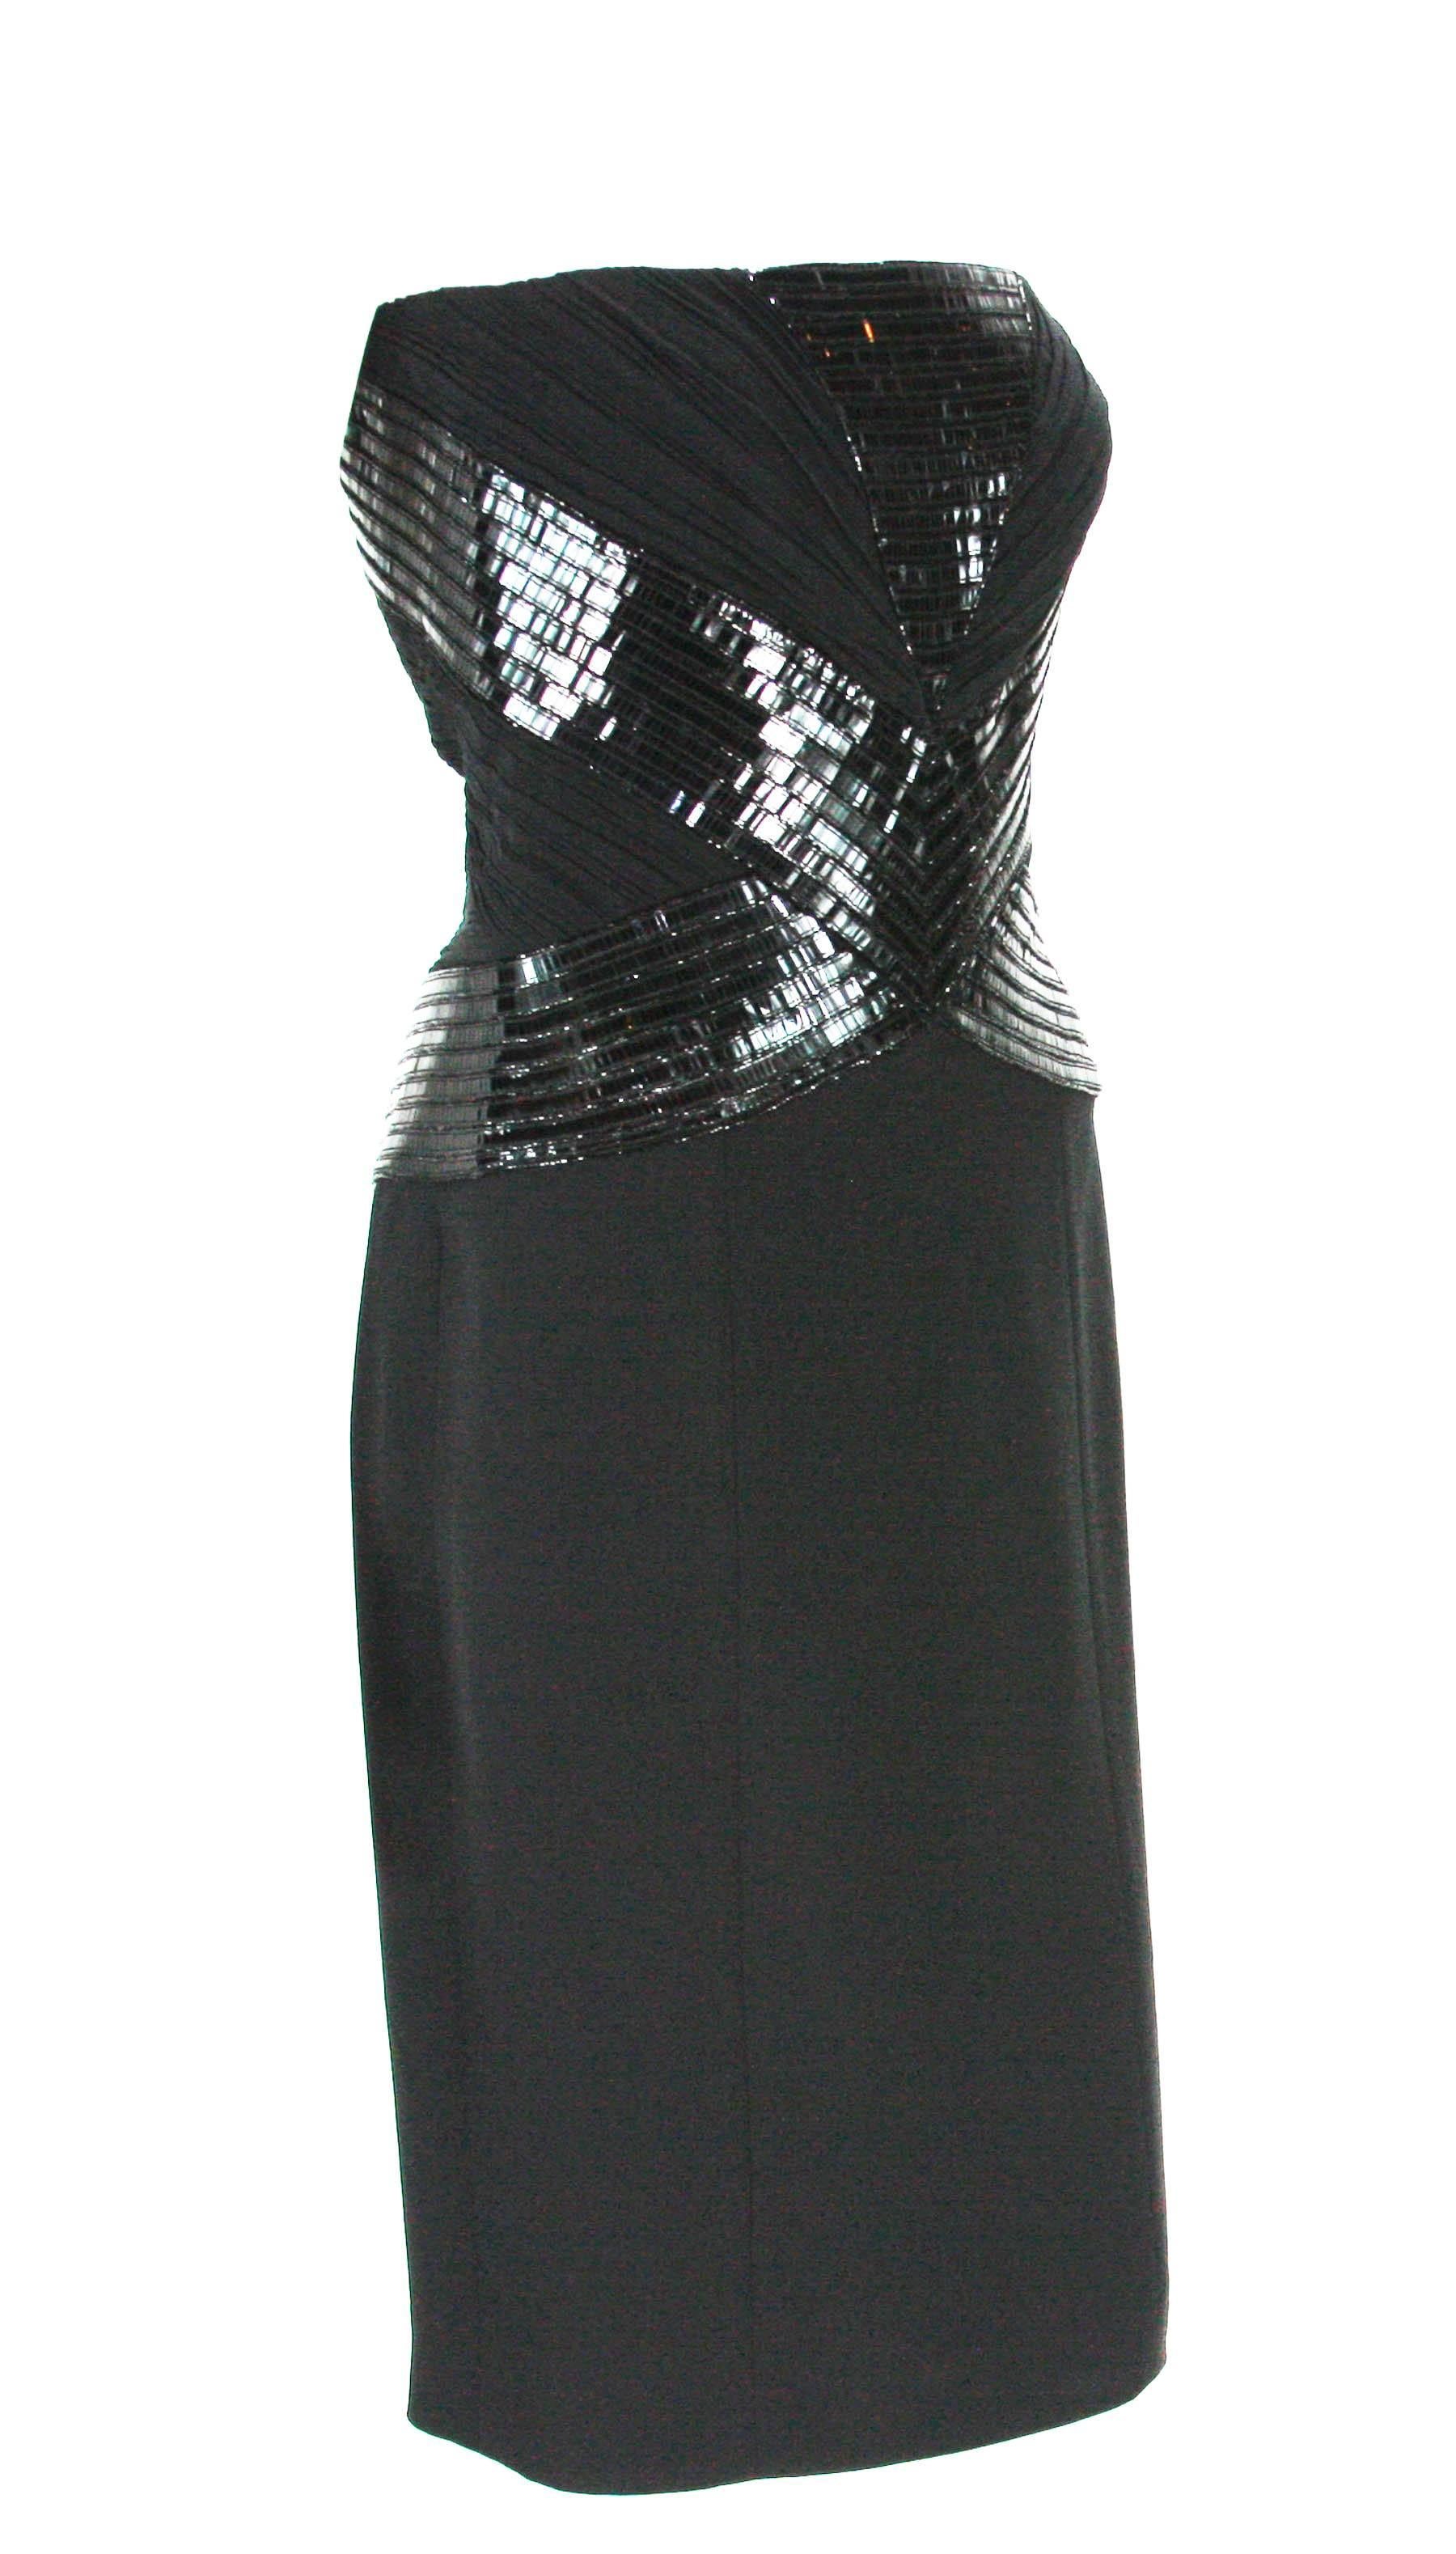 New Versace Embellished Cocktail Dress
Designer size - 40
Black patent leather embellishment around the top, Strapless style, Corset insert, Fully lined in silk, Back zip closure.
Measurements: Length - 34 inches, Bust - 32/33, Waist - 28, Hips area